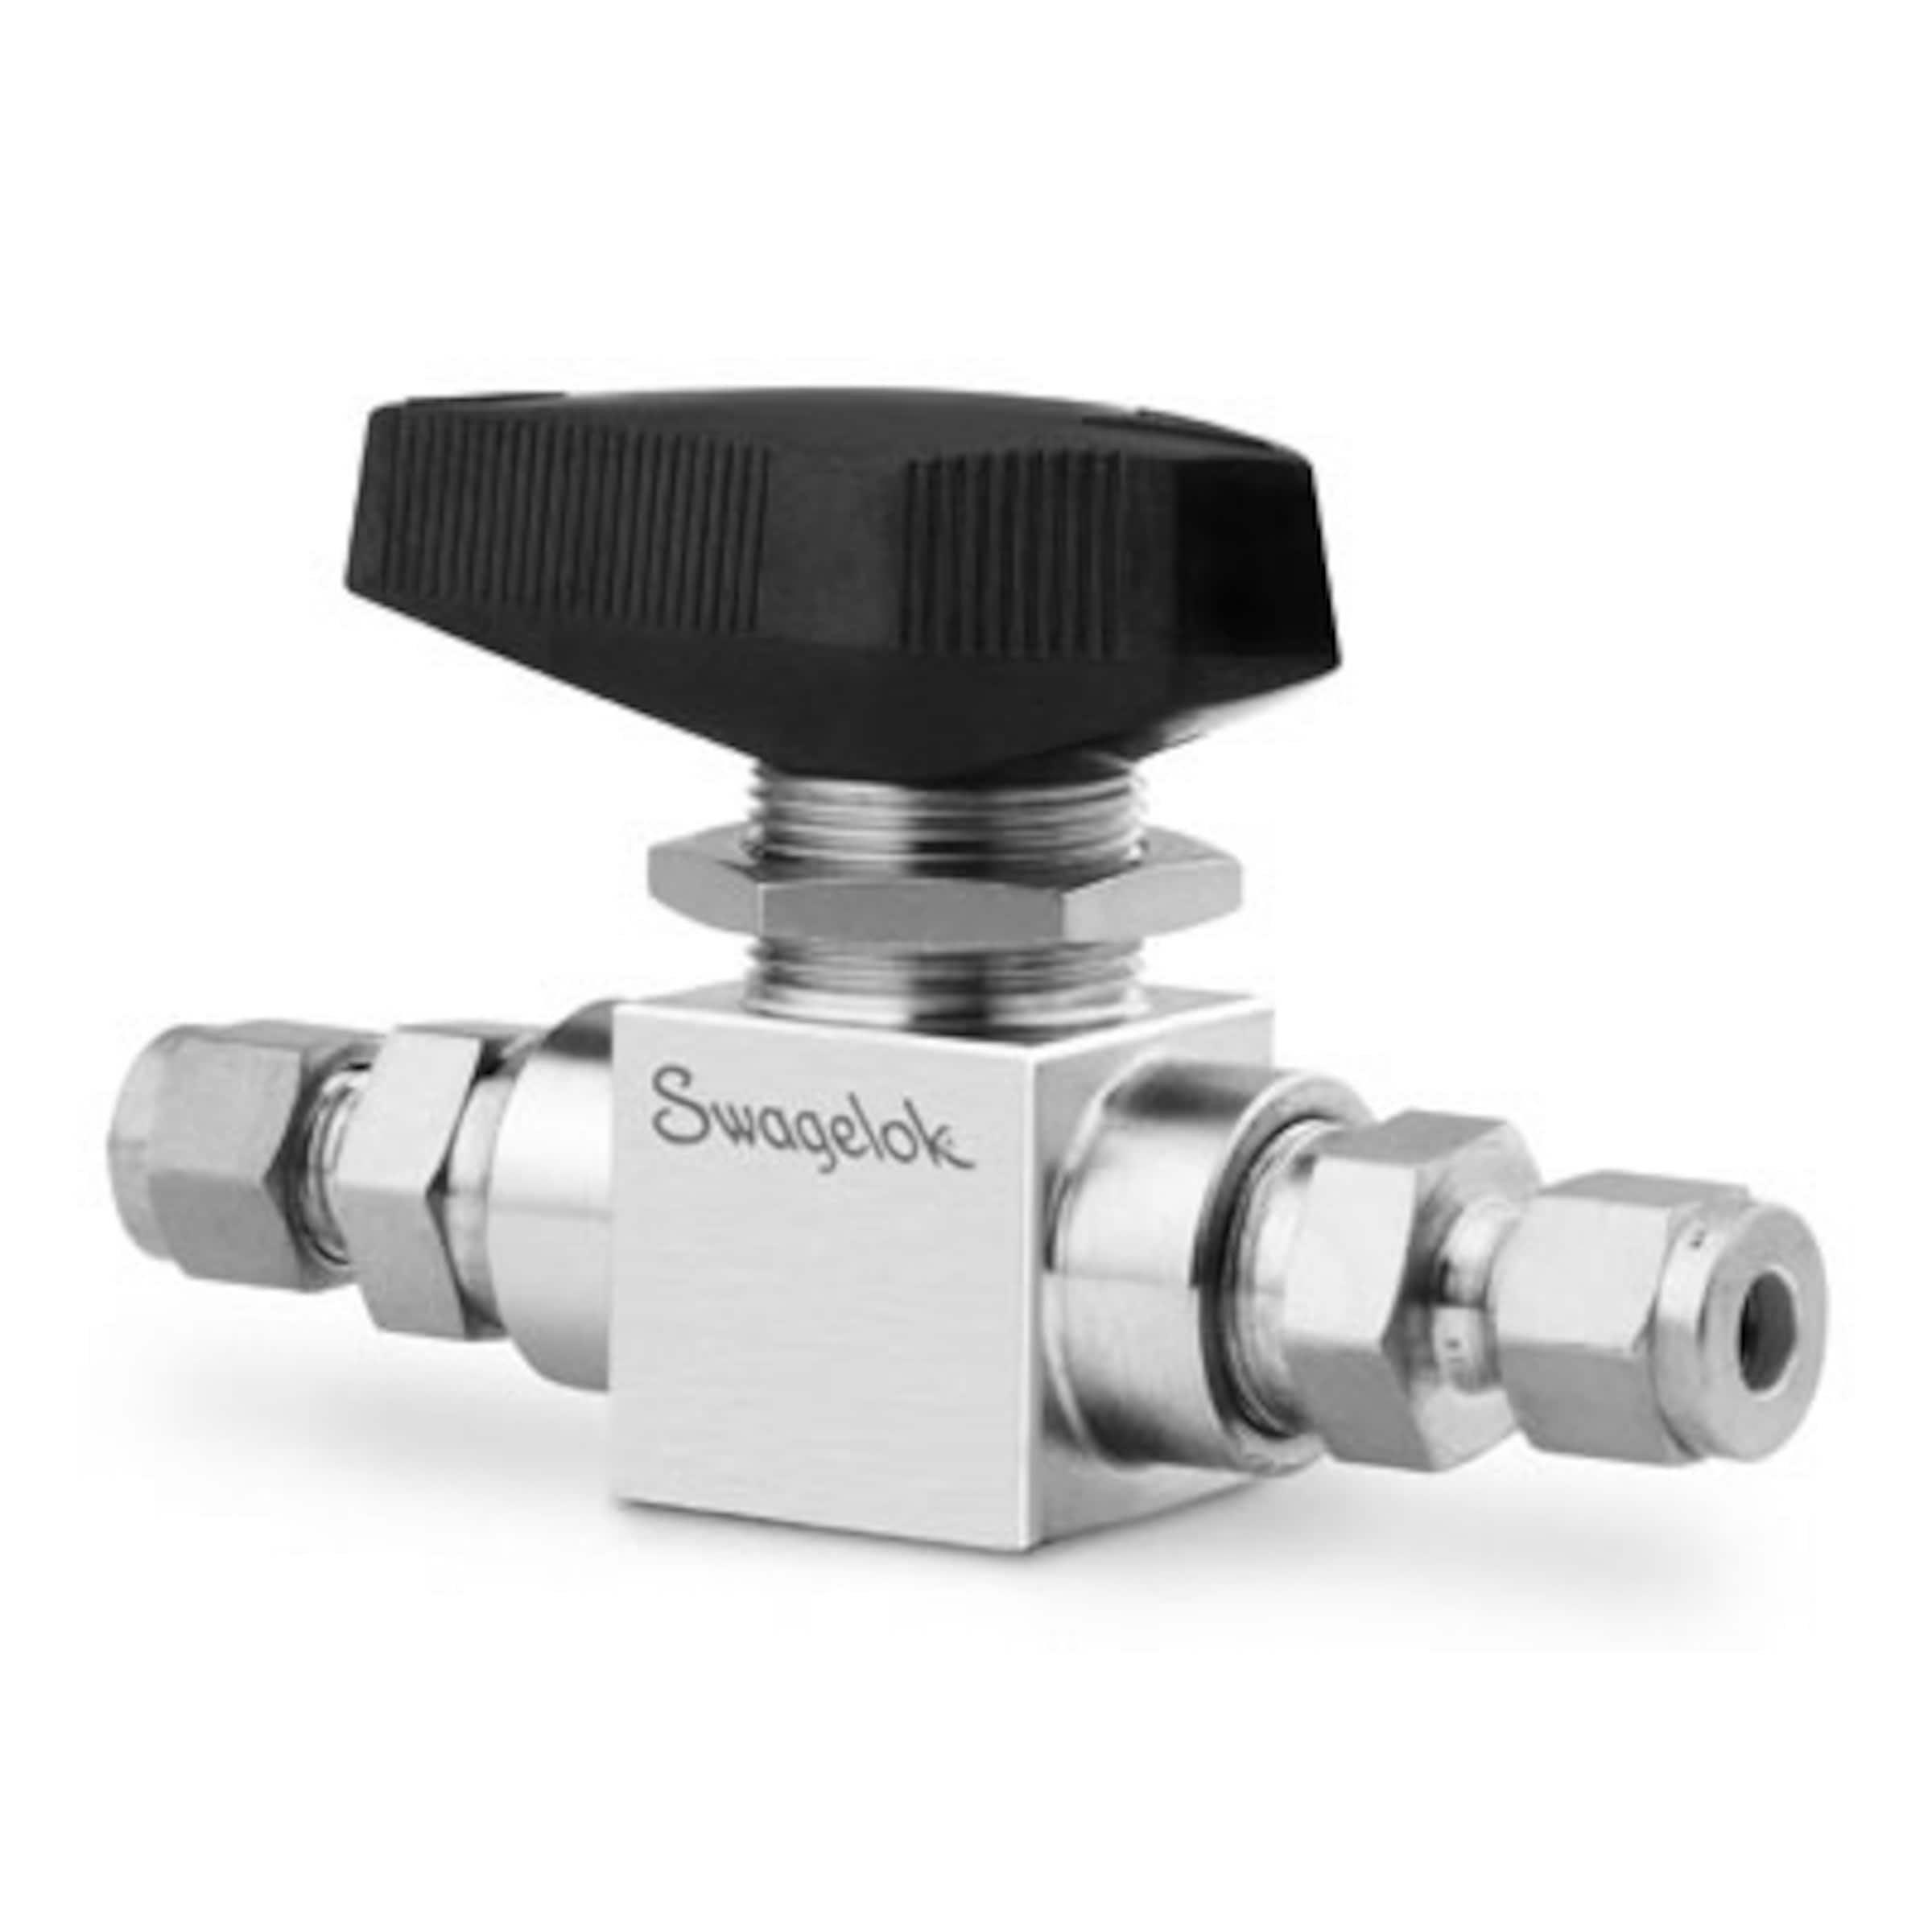 Stainless Steel Quarter Turn Instrument Plug Valve, 3/8 in. Swagelok Tube  Fitting, 1.1 Cv, Locking Handle, Plug Valves, Ball and Quarter-Turn Plug  Valves, Valves, All Products